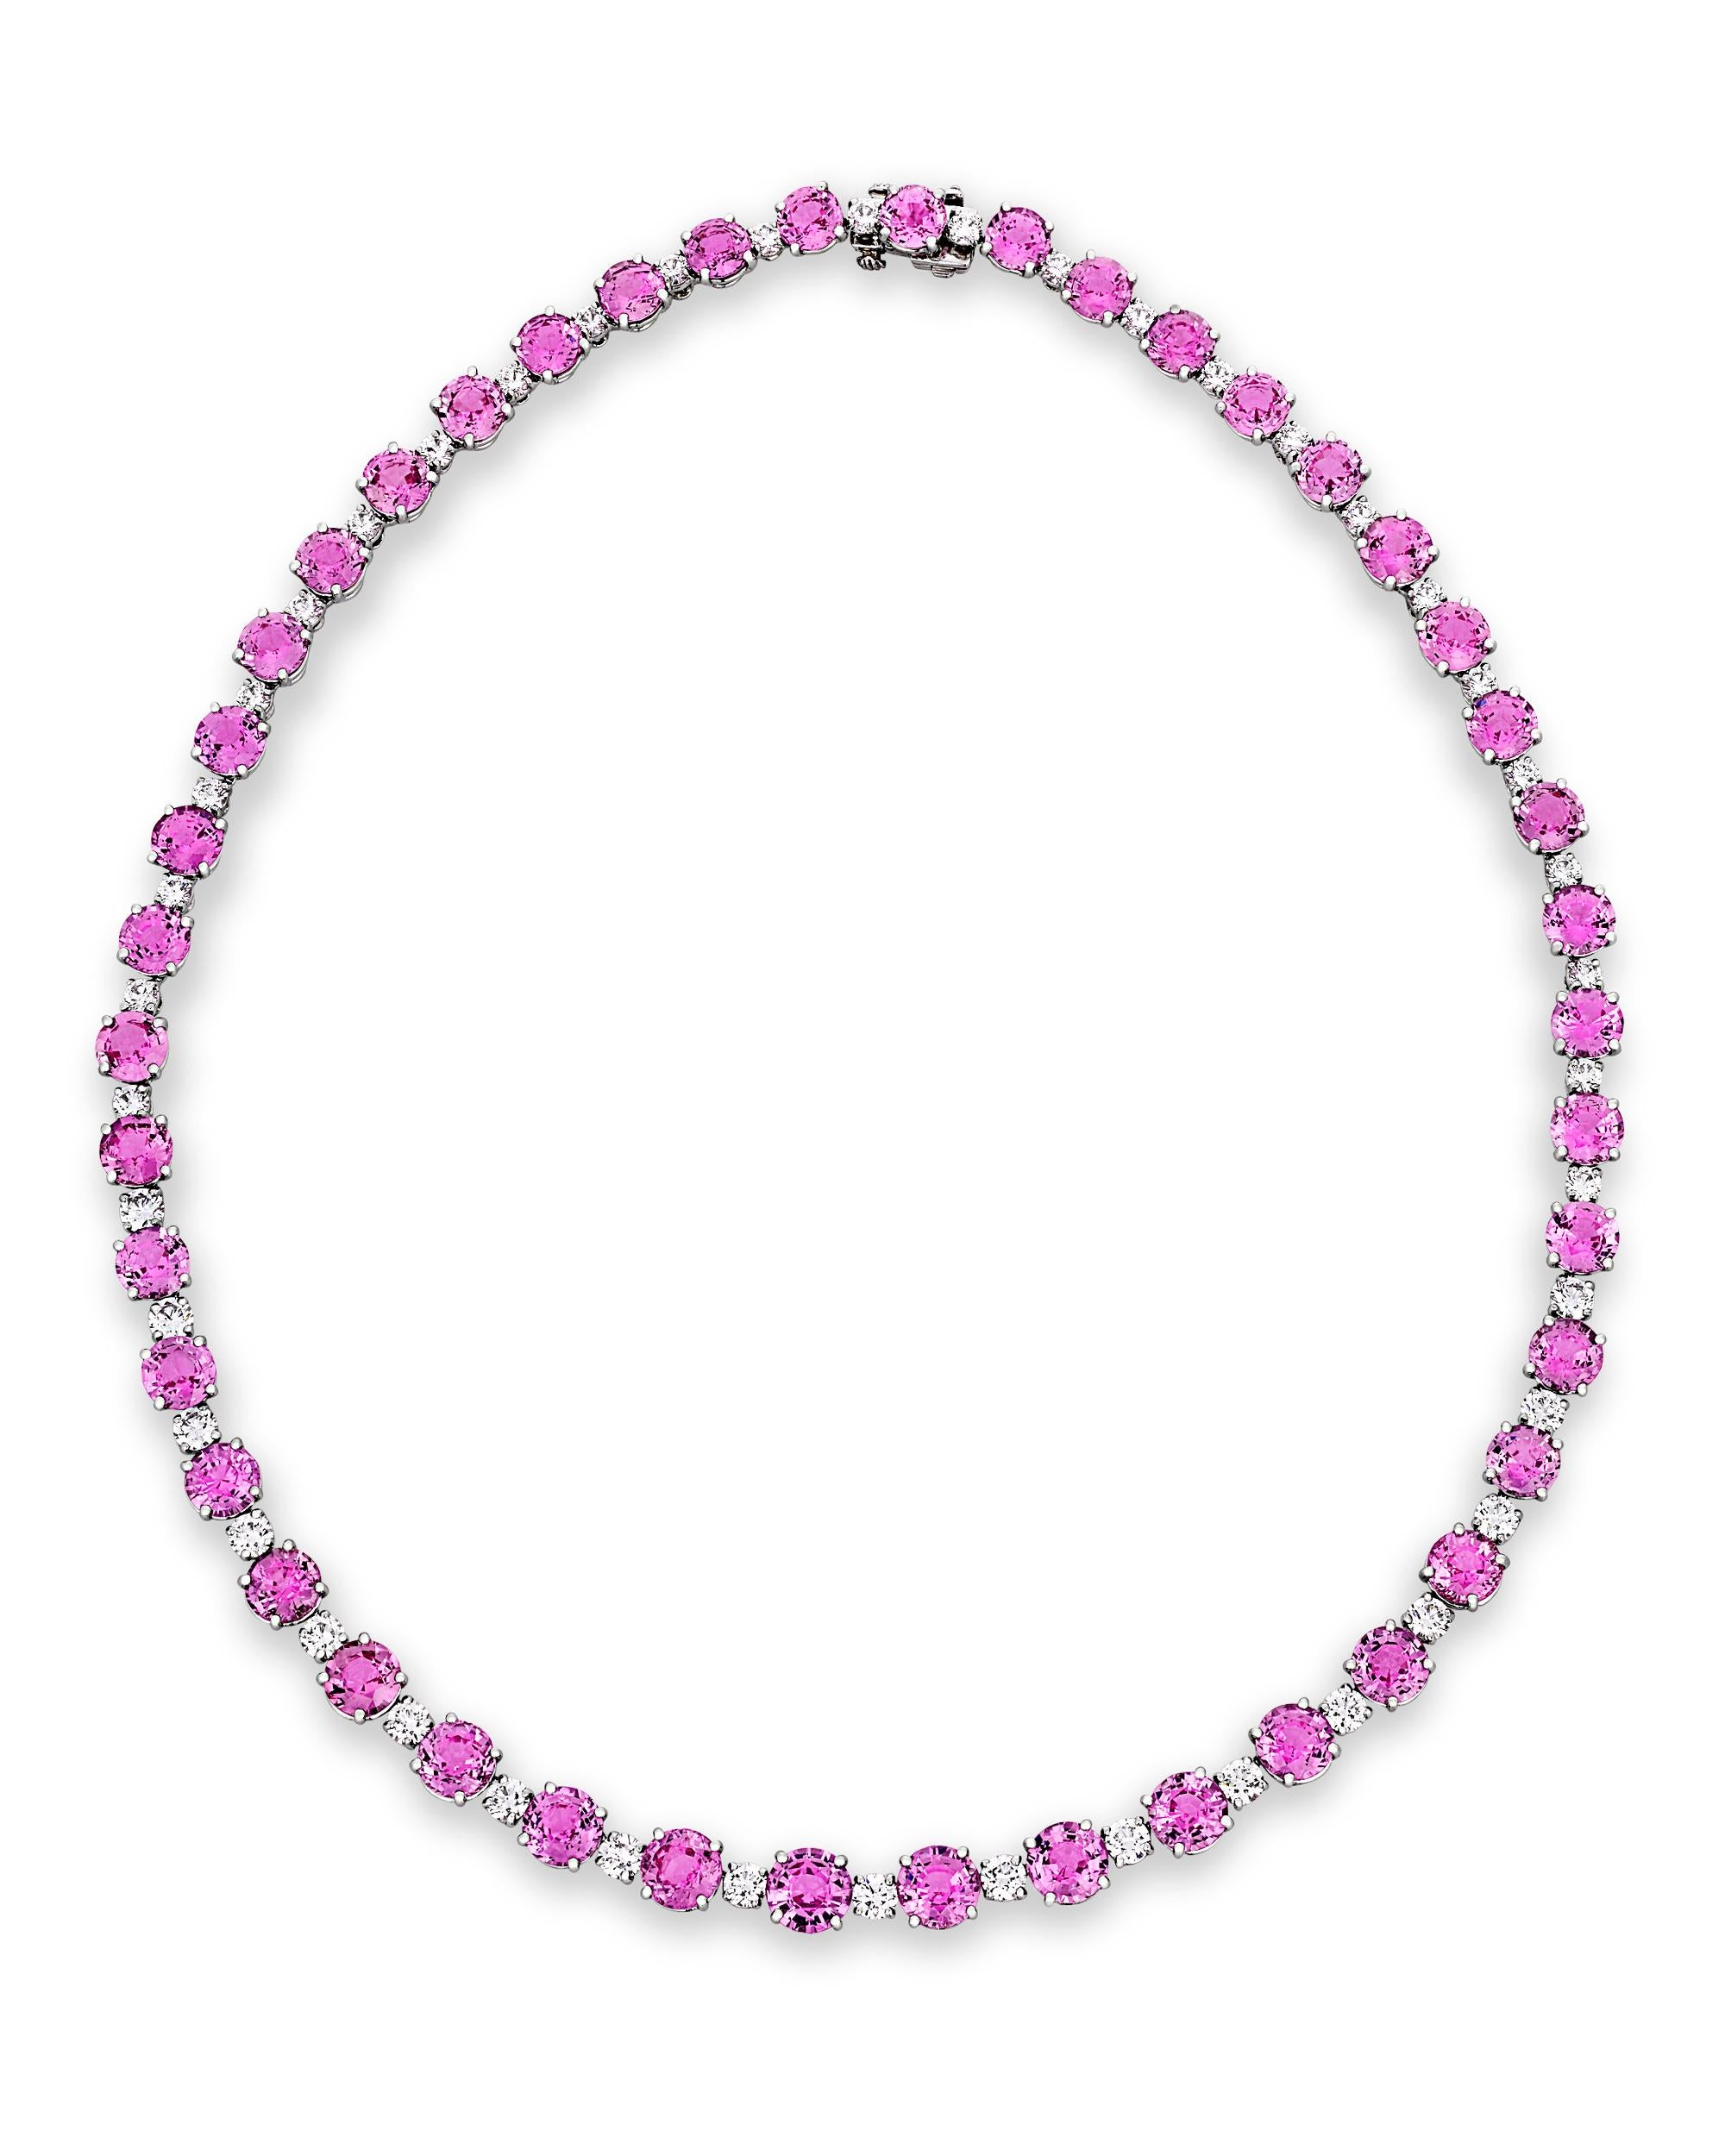 A stunning collection of 44 rare pink sapphires weighing 45.22 total carats are set into this necklace by the visionary American jeweler Oscar Heyman. The design alternates the perfectly-matched sapphires with 5.58 carats of white diamonds in a